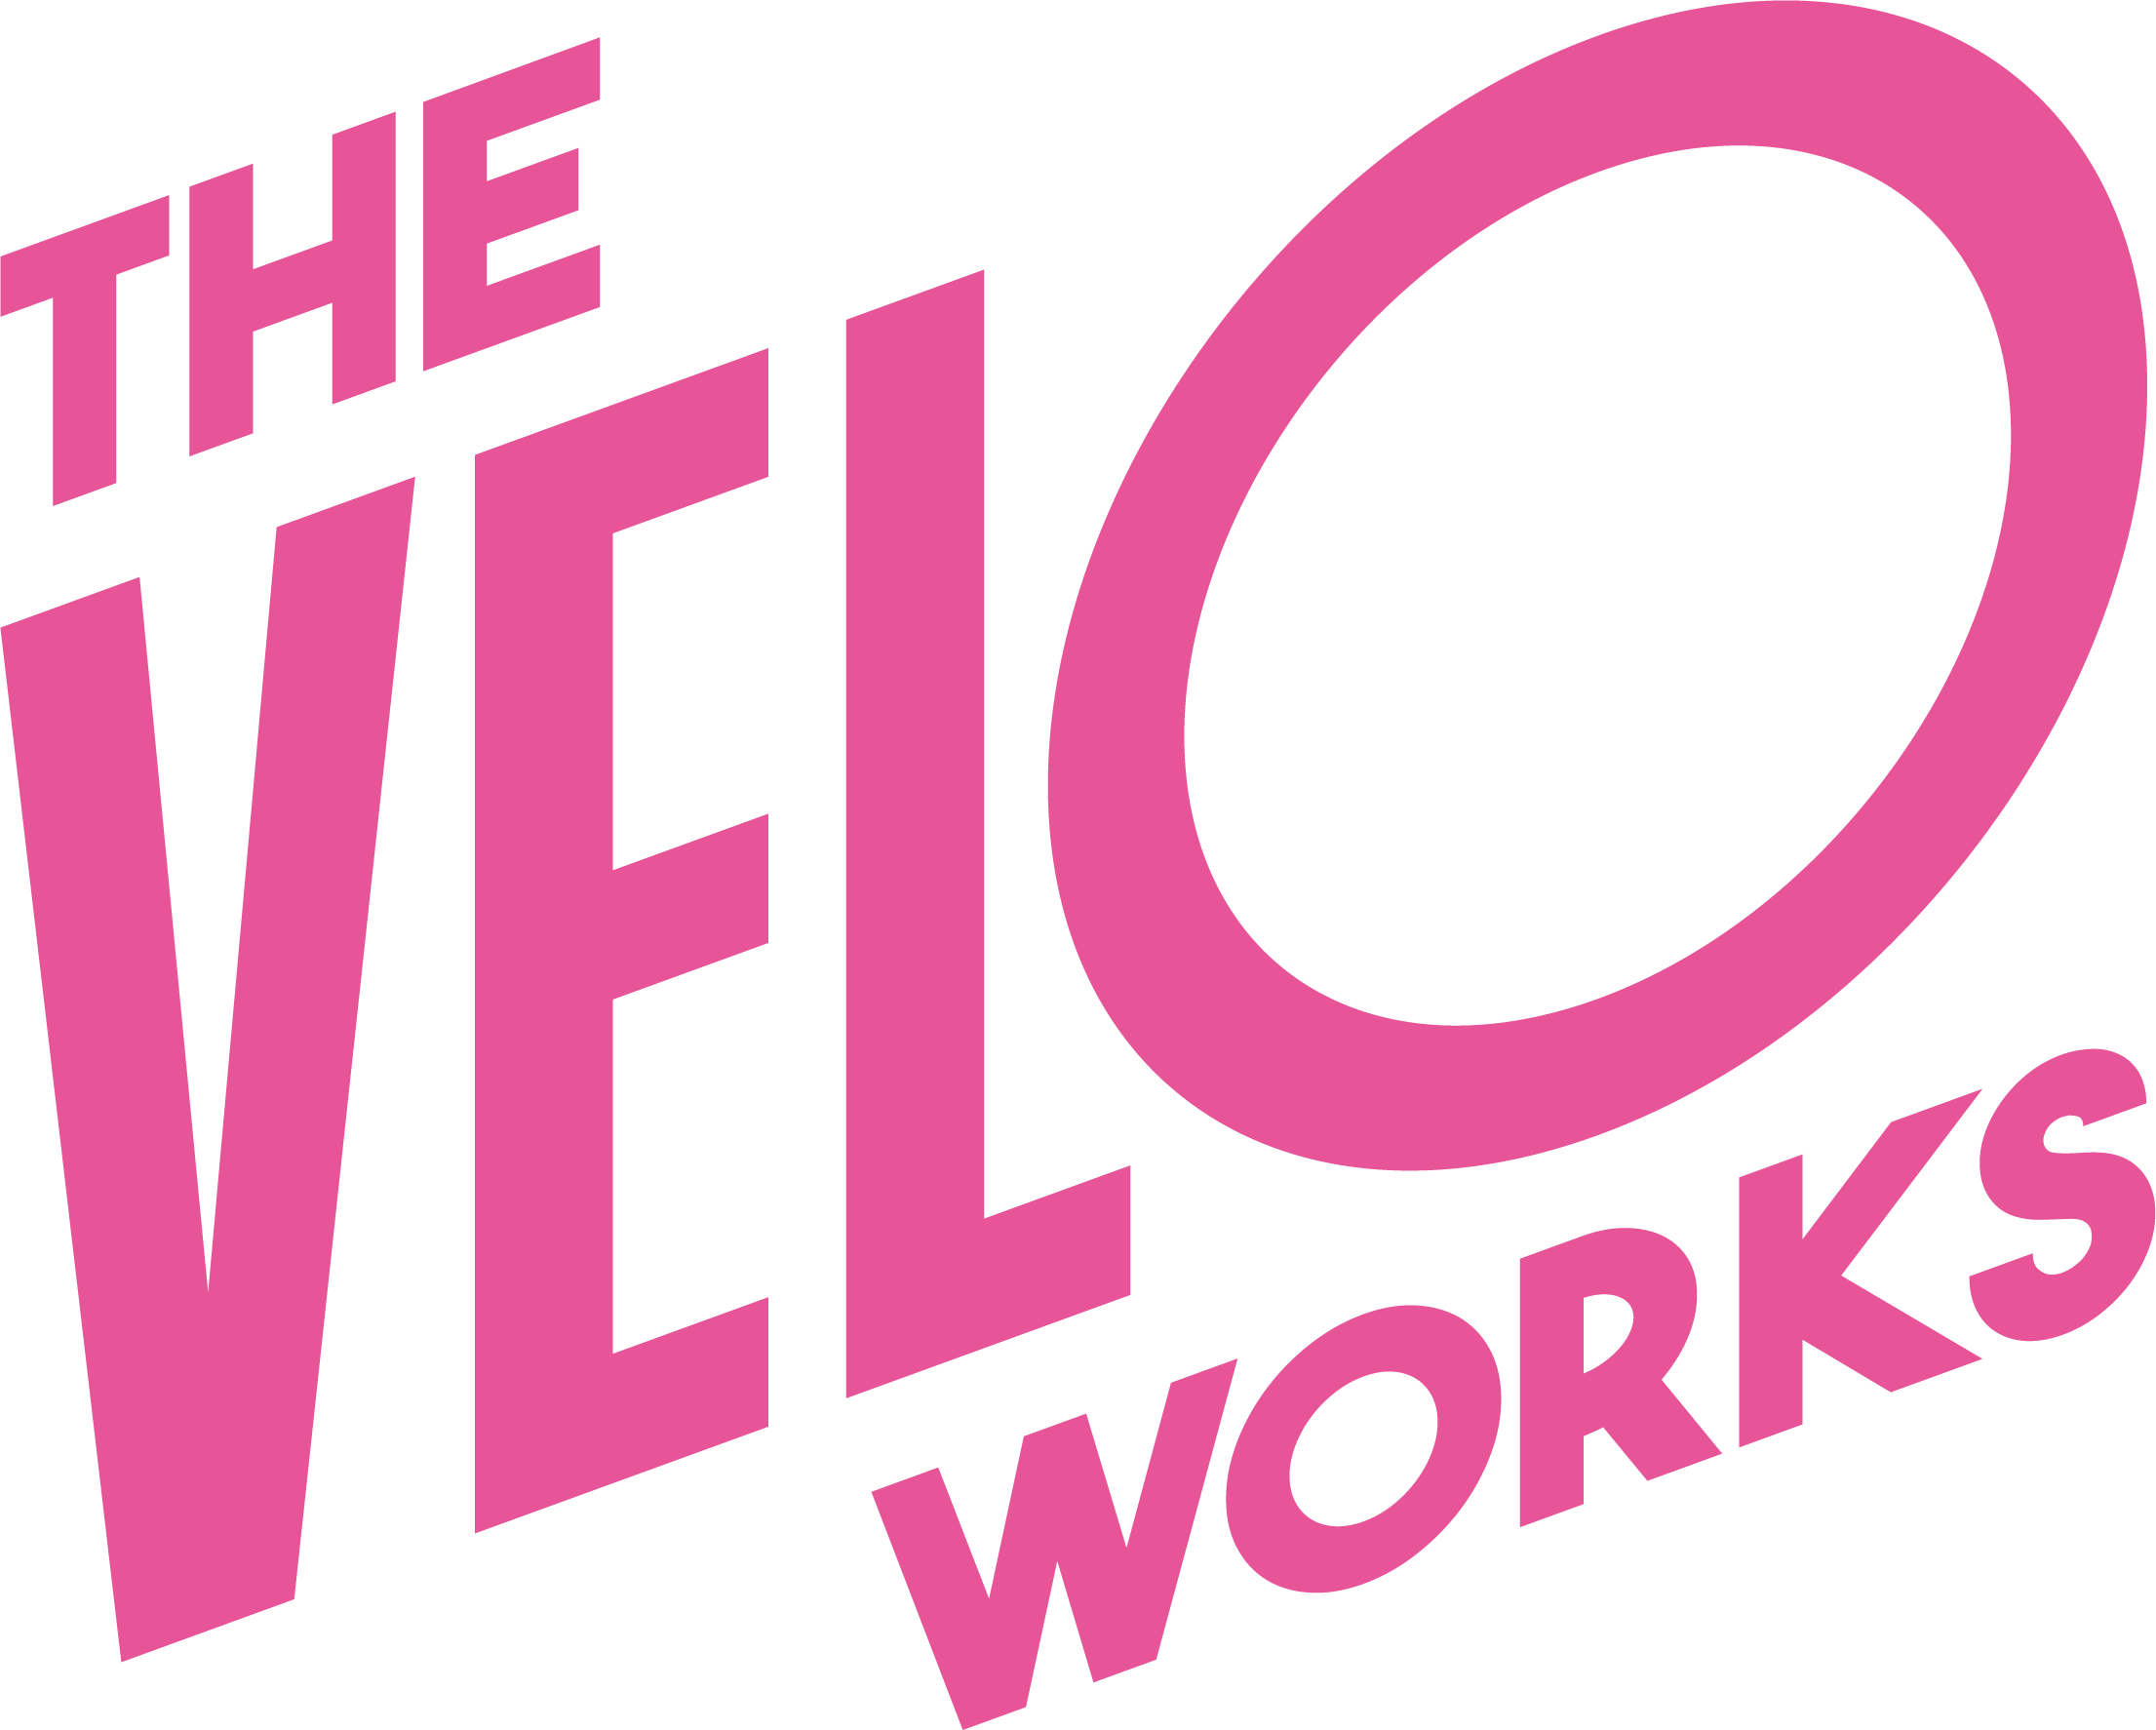 The Velo Works